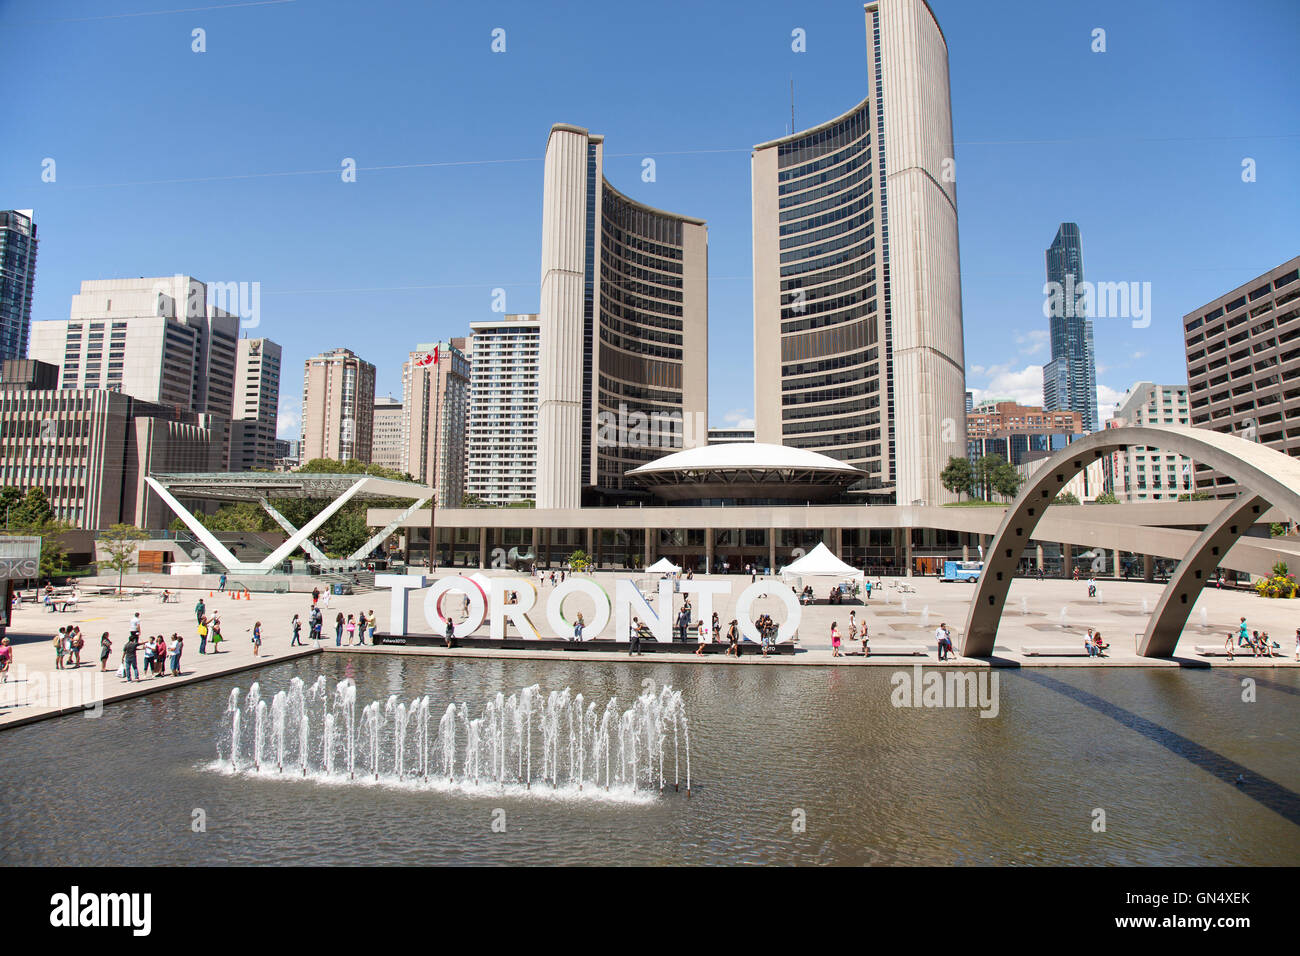 TORONTO - AUGUST 8, 2016: Toronto Nathan Phillips Square with city hall and the famous 'Toronto' sign. Stock Photo